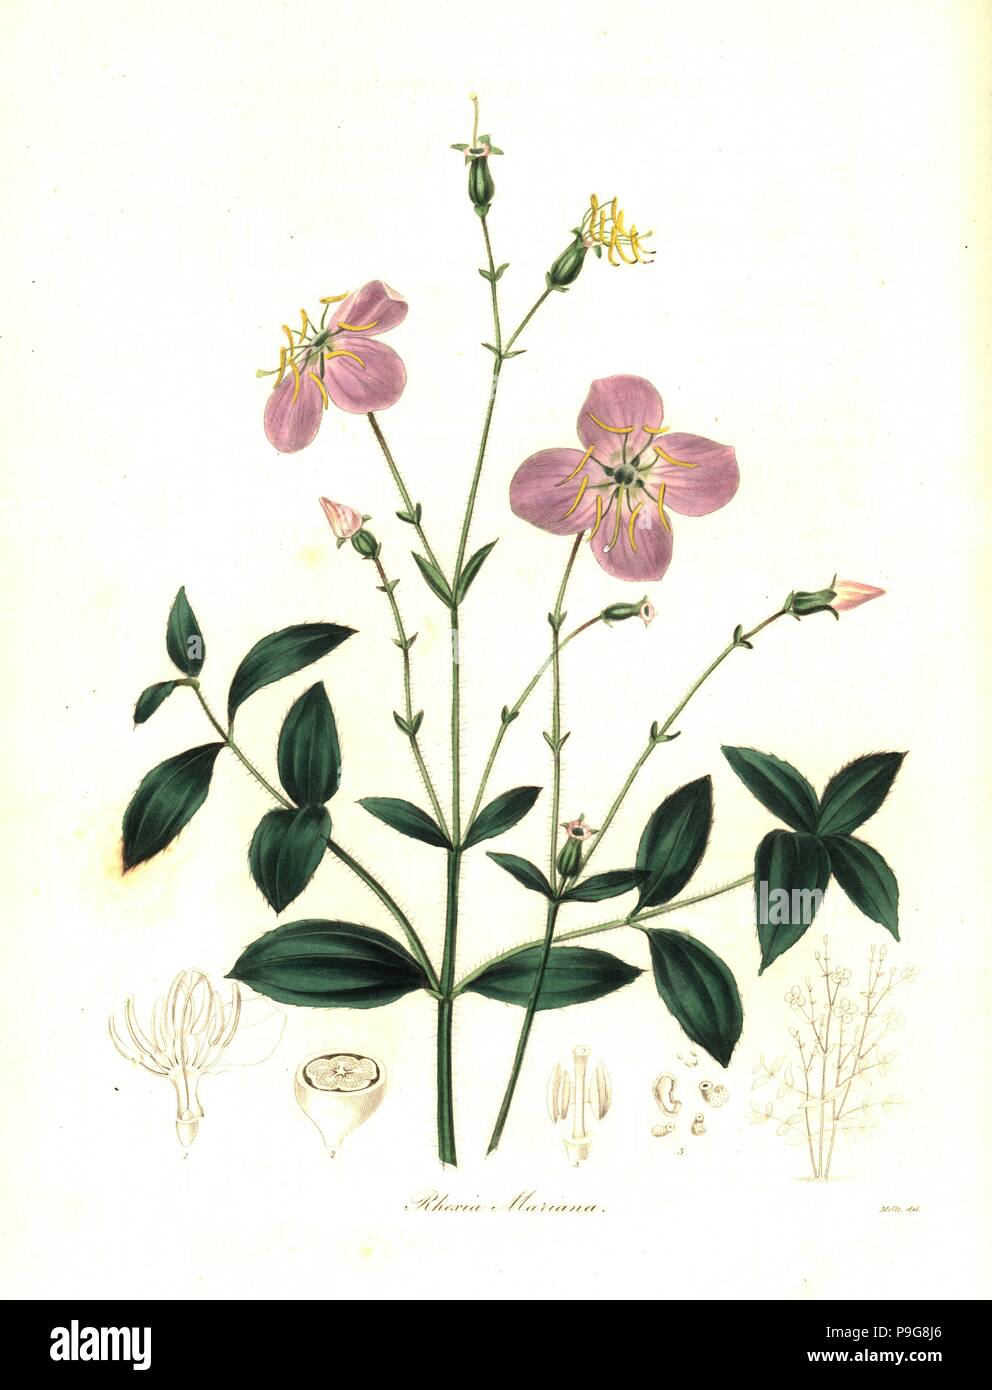 Maryland rhexia, Rhexia mariana. Handcoloured copperplate engraving after a botanical illustration by Mills from Benjamin Maund and the Rev. John Stevens Henslow's The Botanist, London, 1836. Stock Photo